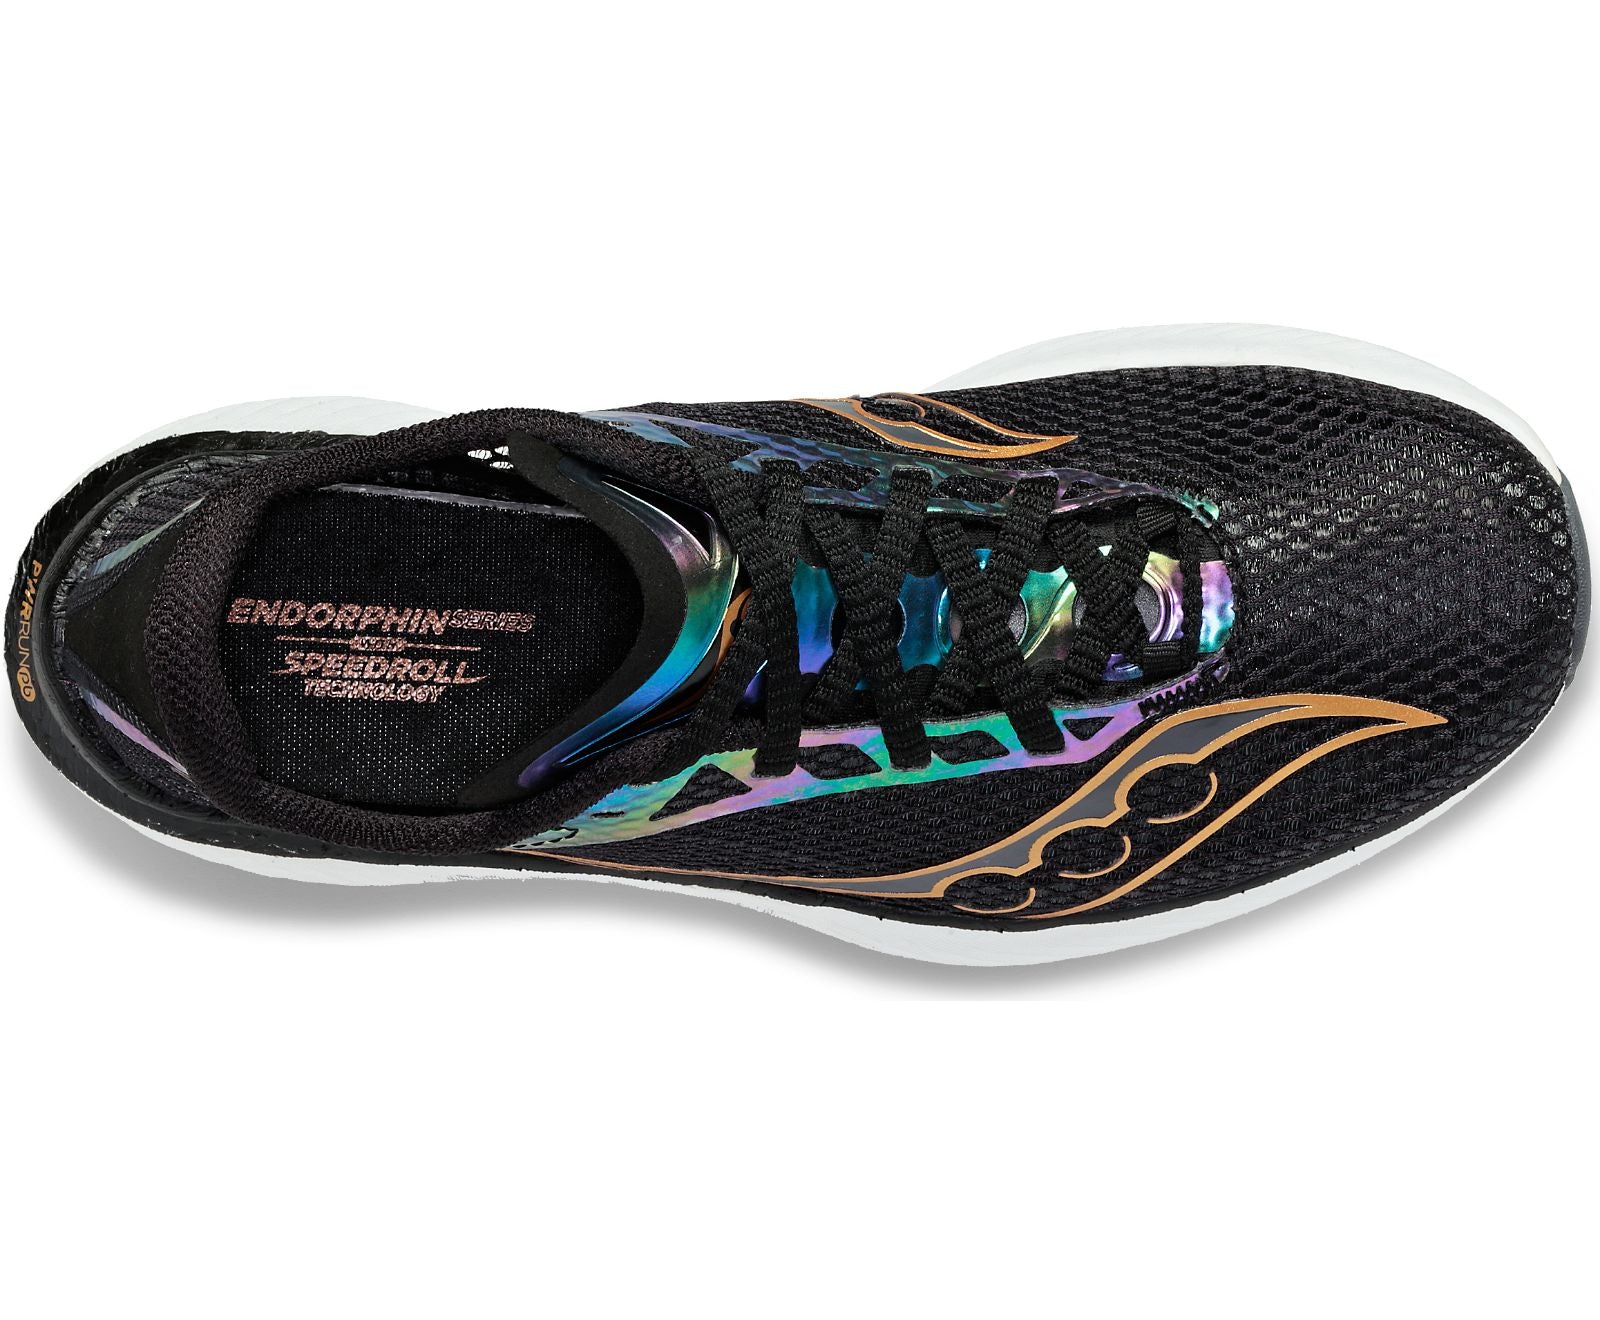 Top view of the Men's Endorphin Pro 3 by Saucony in the color Black/Goldstruck